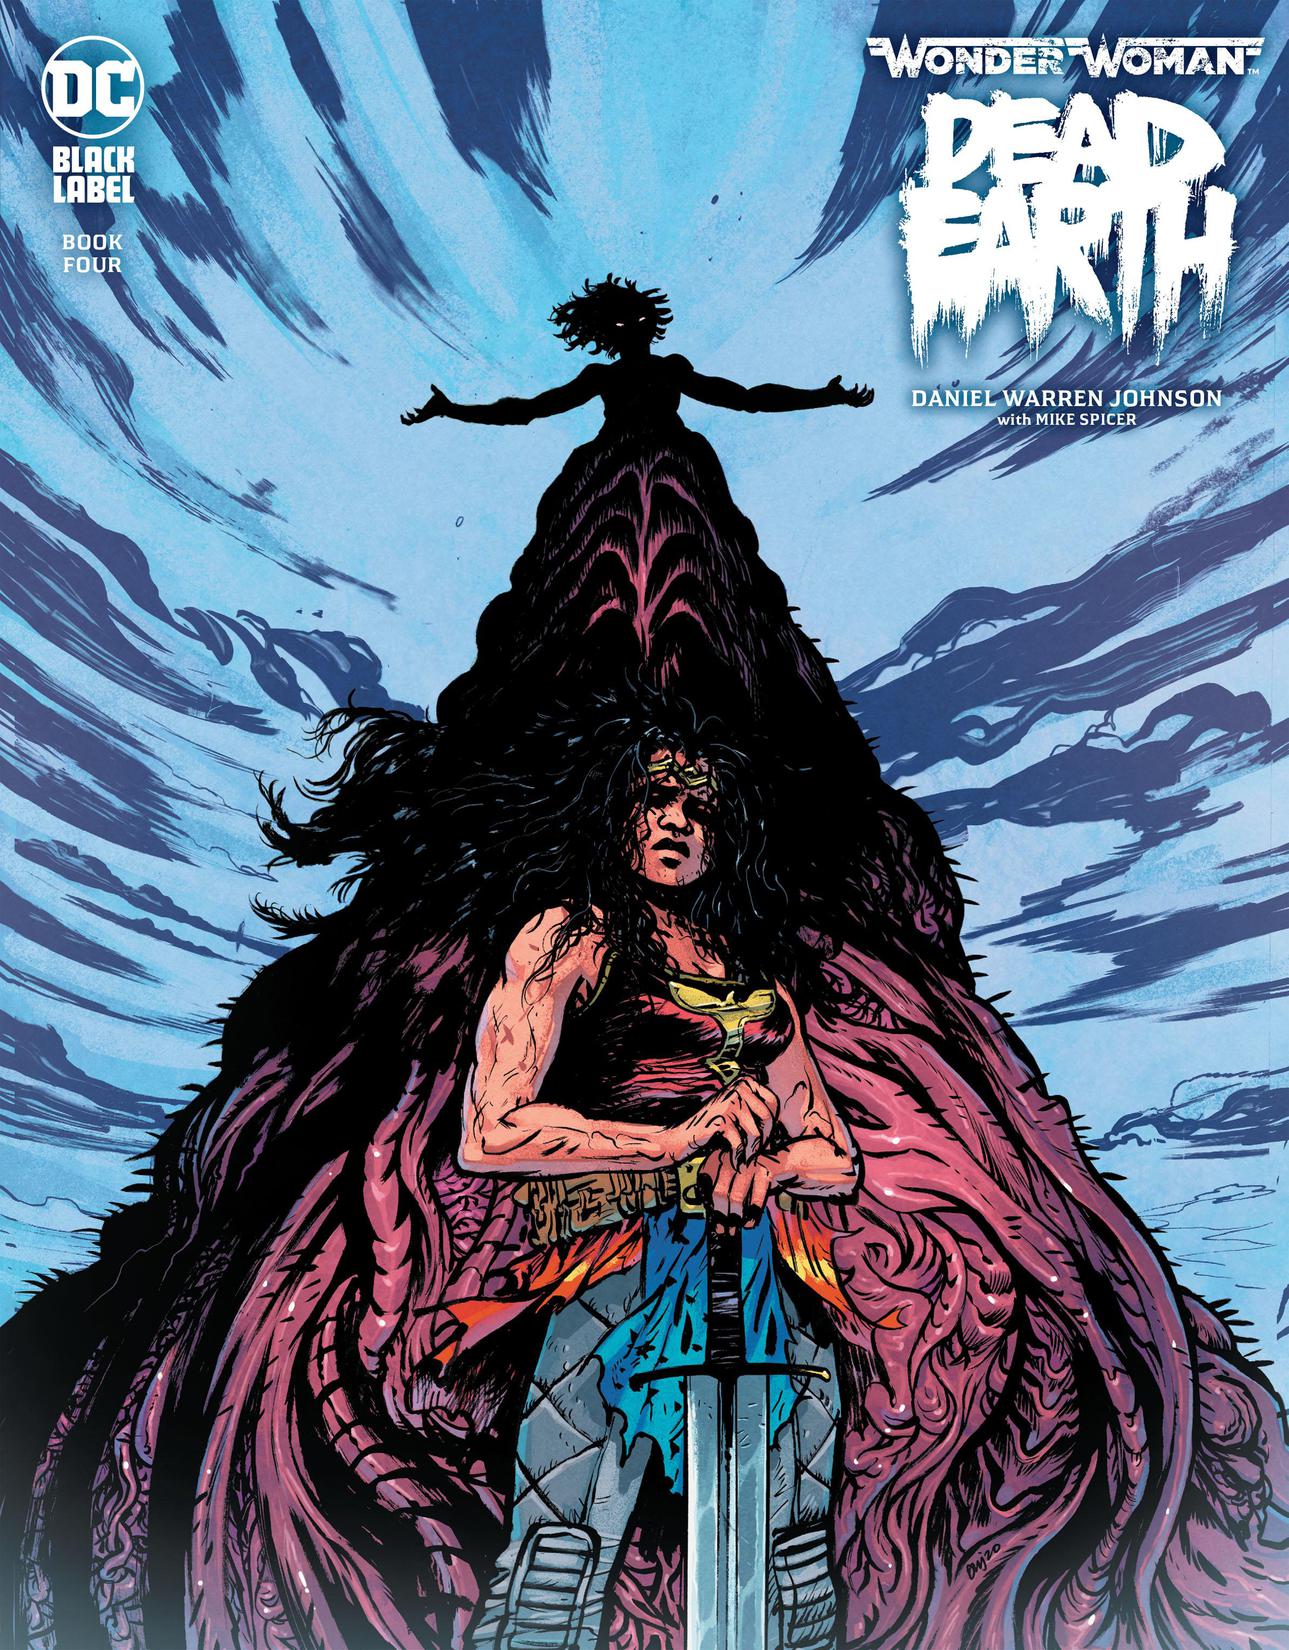 Wonder Woman: Dead Earth #4 preview images